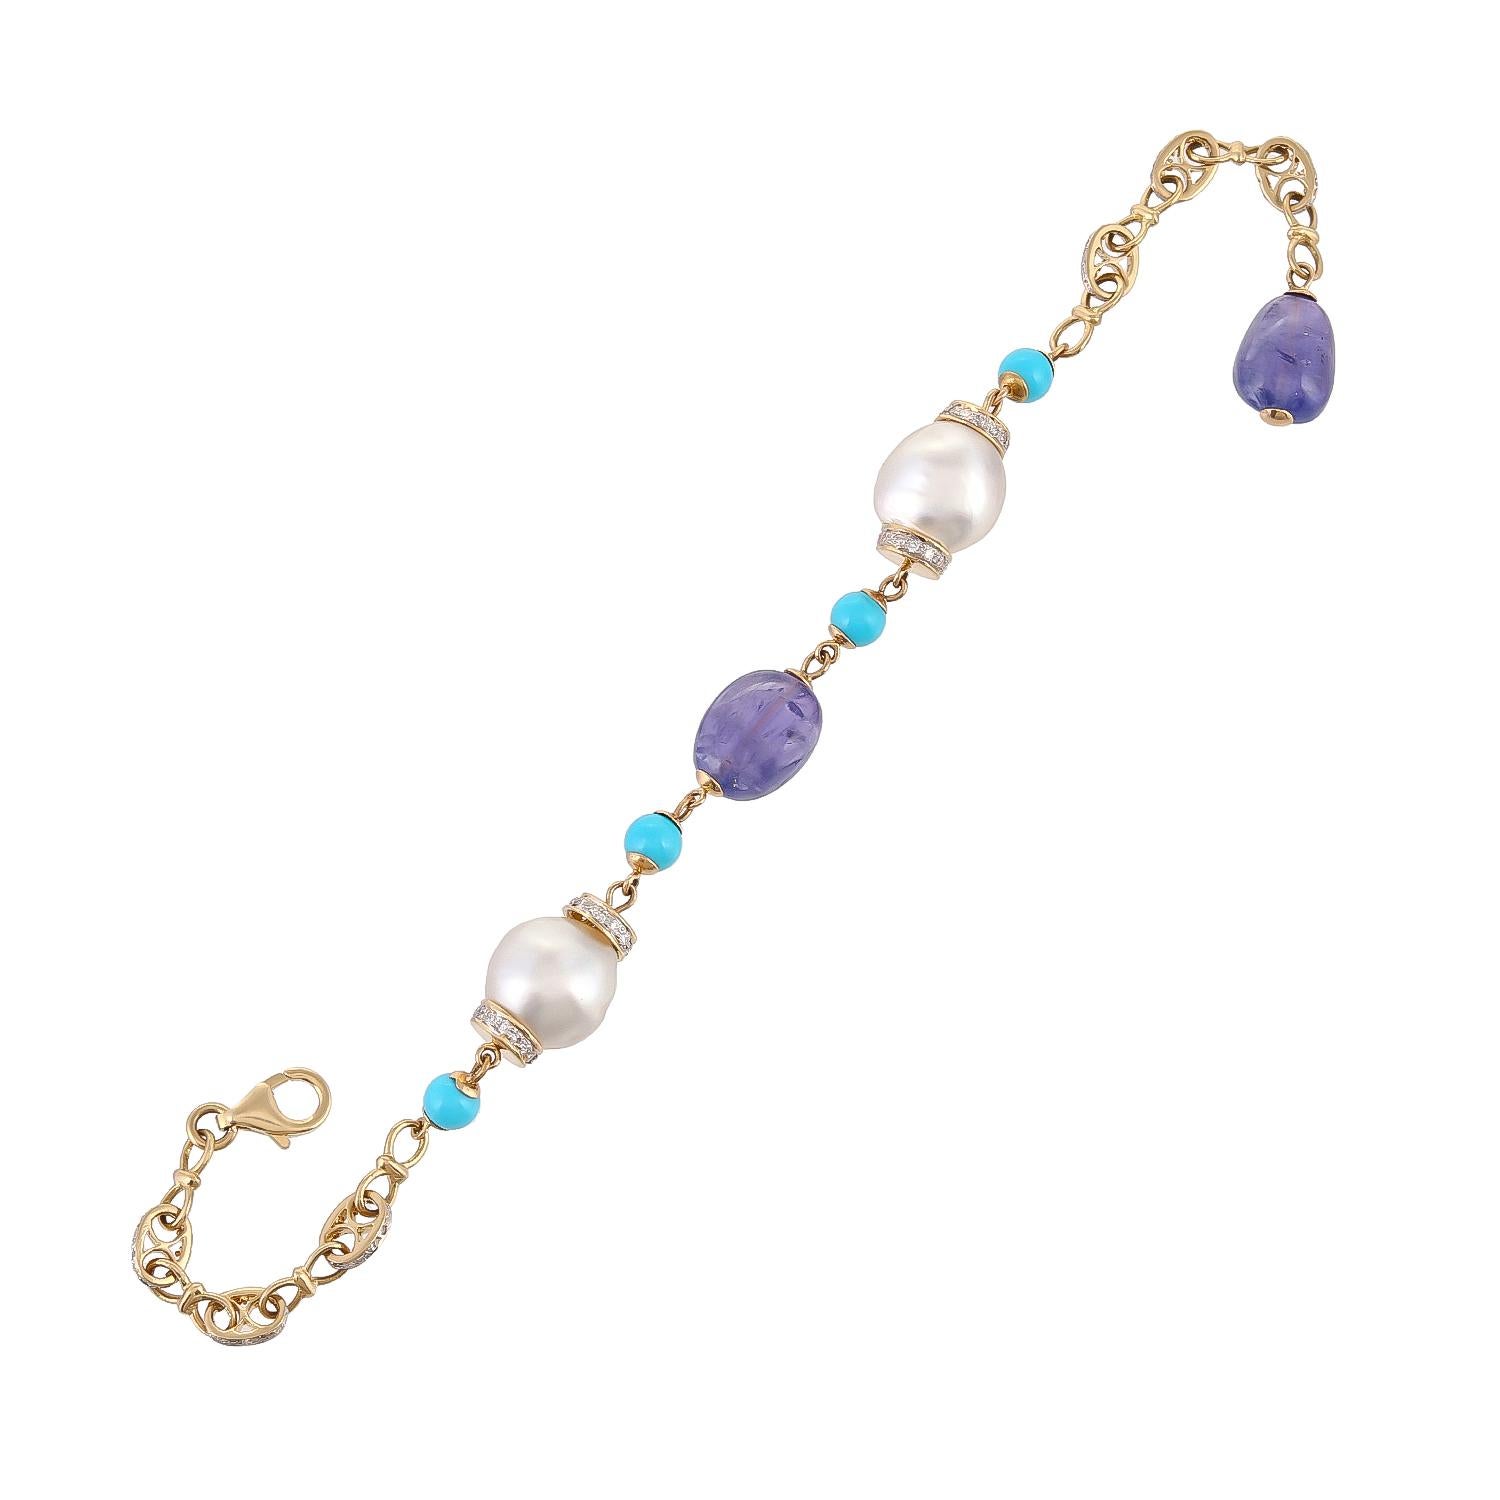 A stunning Combination of 23.55 carats south sea pearls and 17.75 carats tanzanite dumbles decorated with Arizona turquoise 4mm rounds further add to the summer feel enhanced with 0.88 carats diamonds. Handcrafted in 18kt Yellow Gold.
Art of